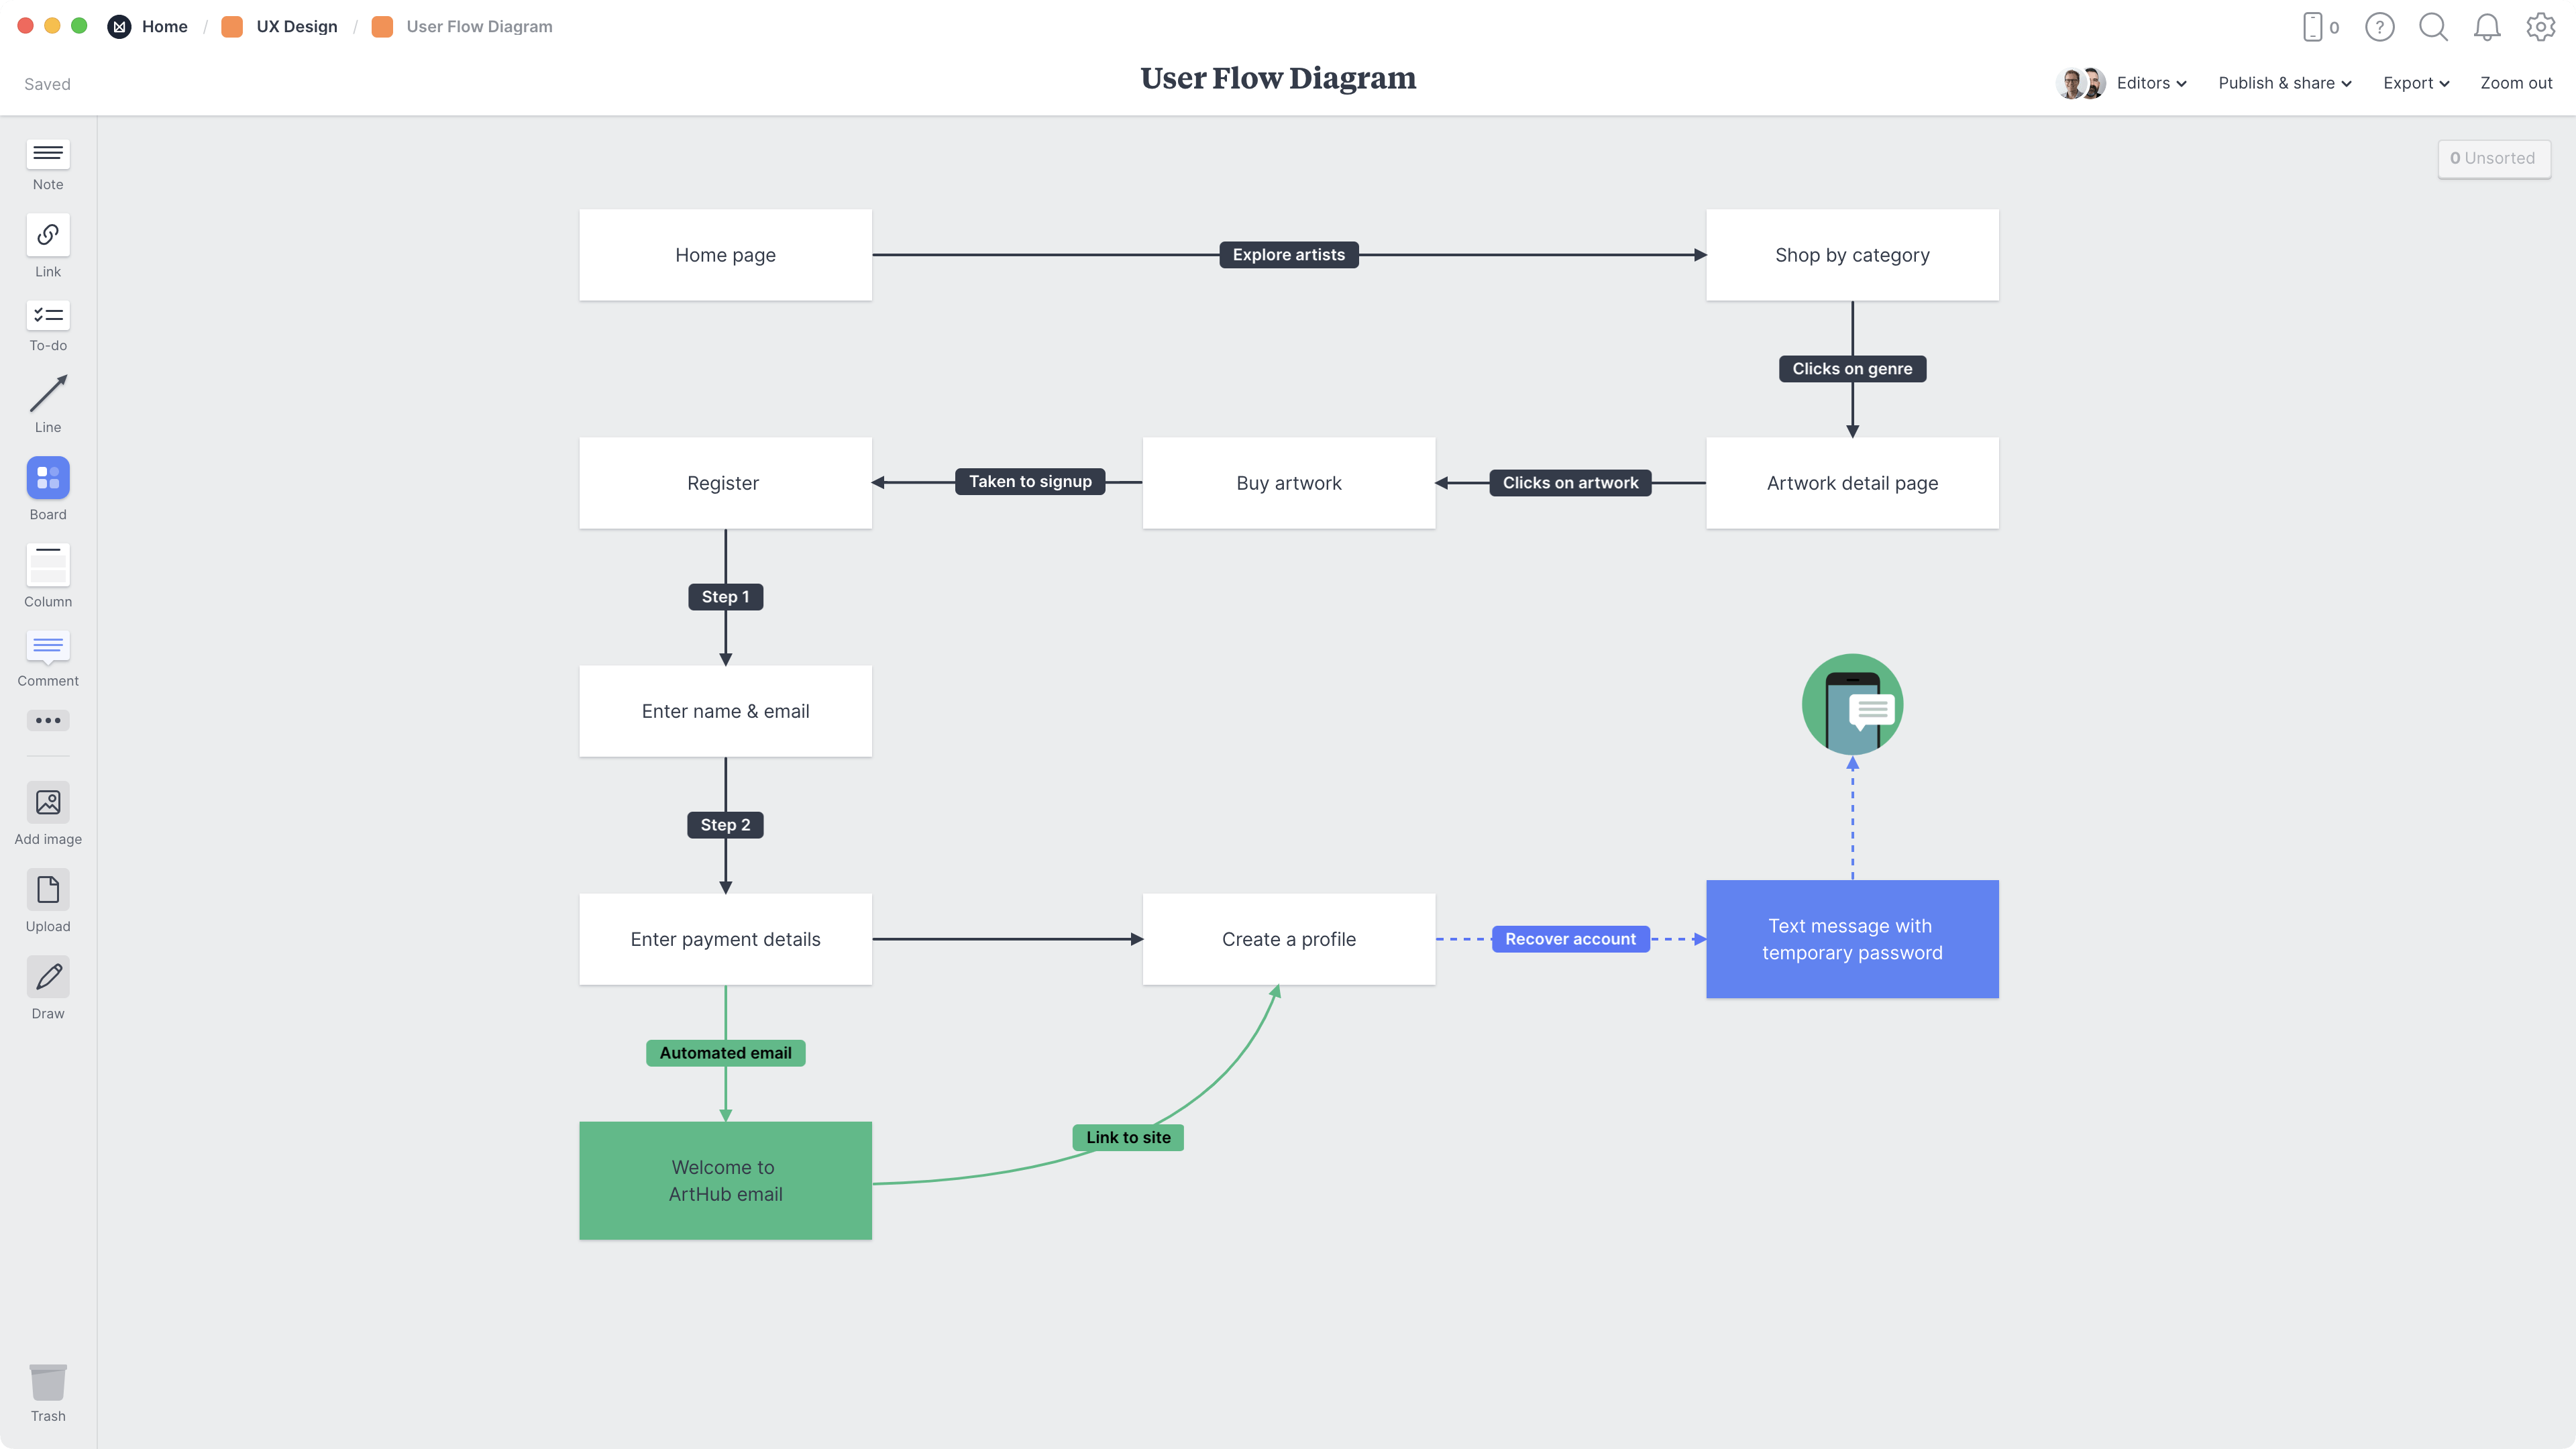 User Flow Diagram Template, within the Milanote app